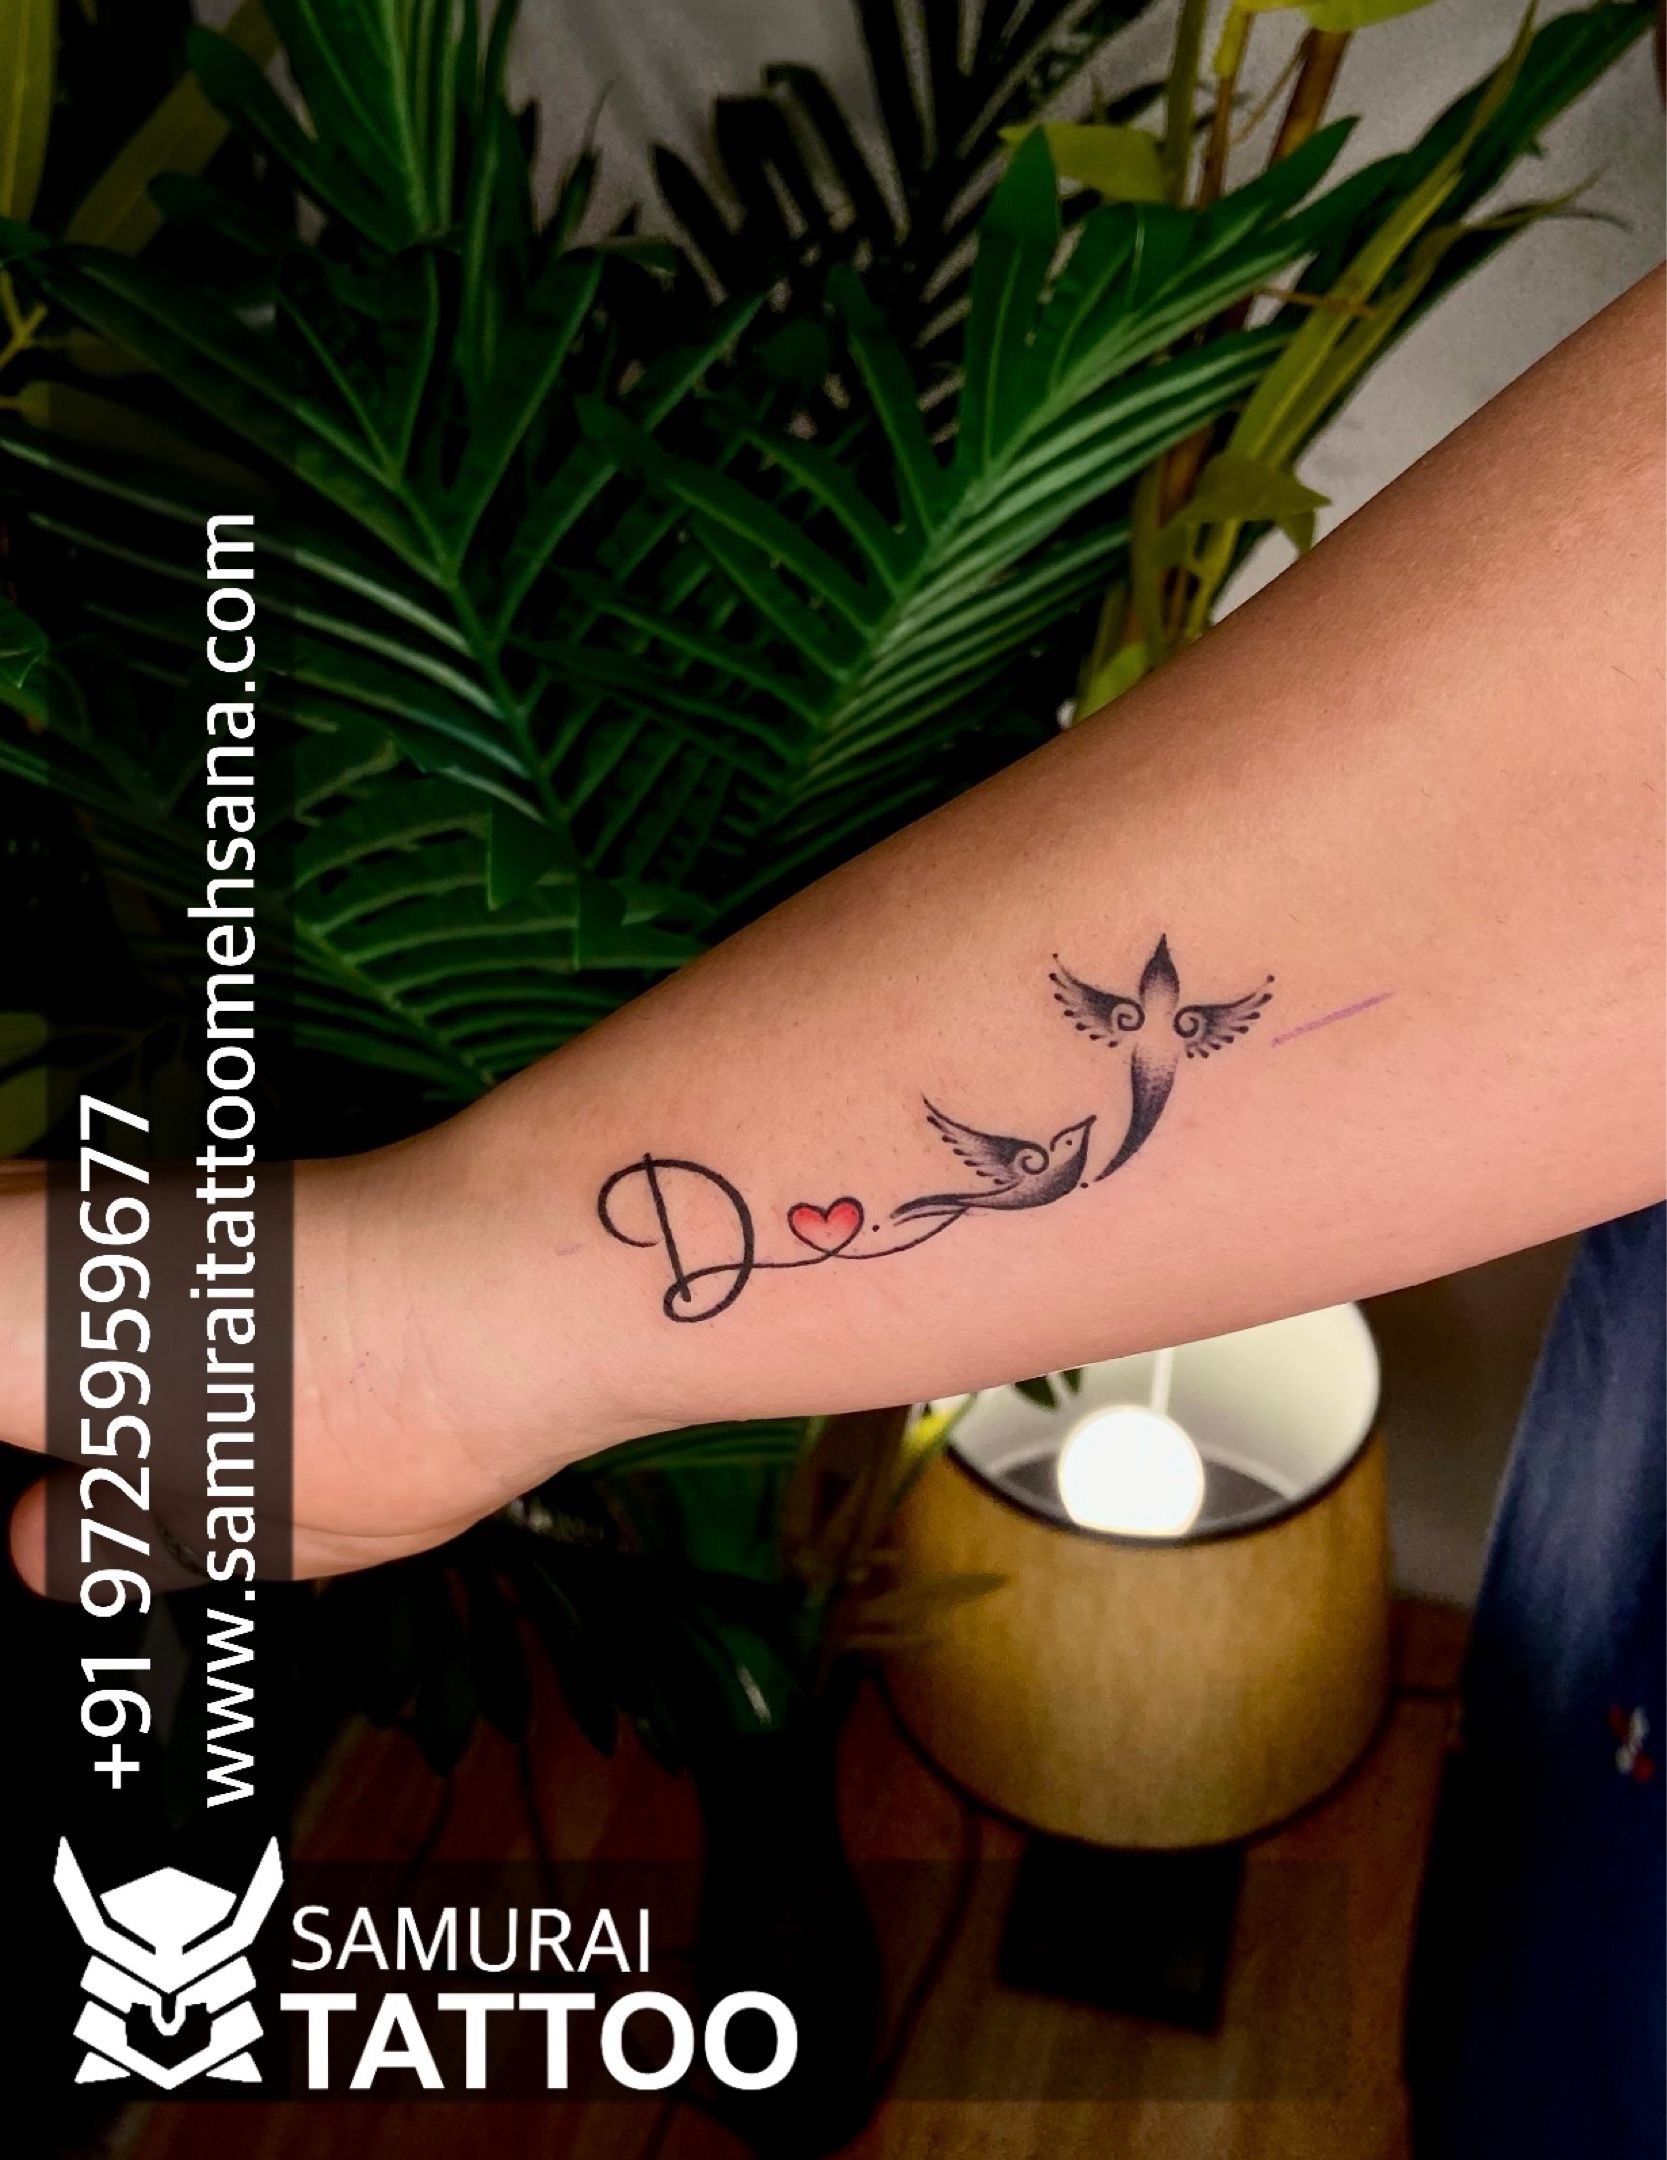 Share more than 81 d tattoo image best - thtantai2